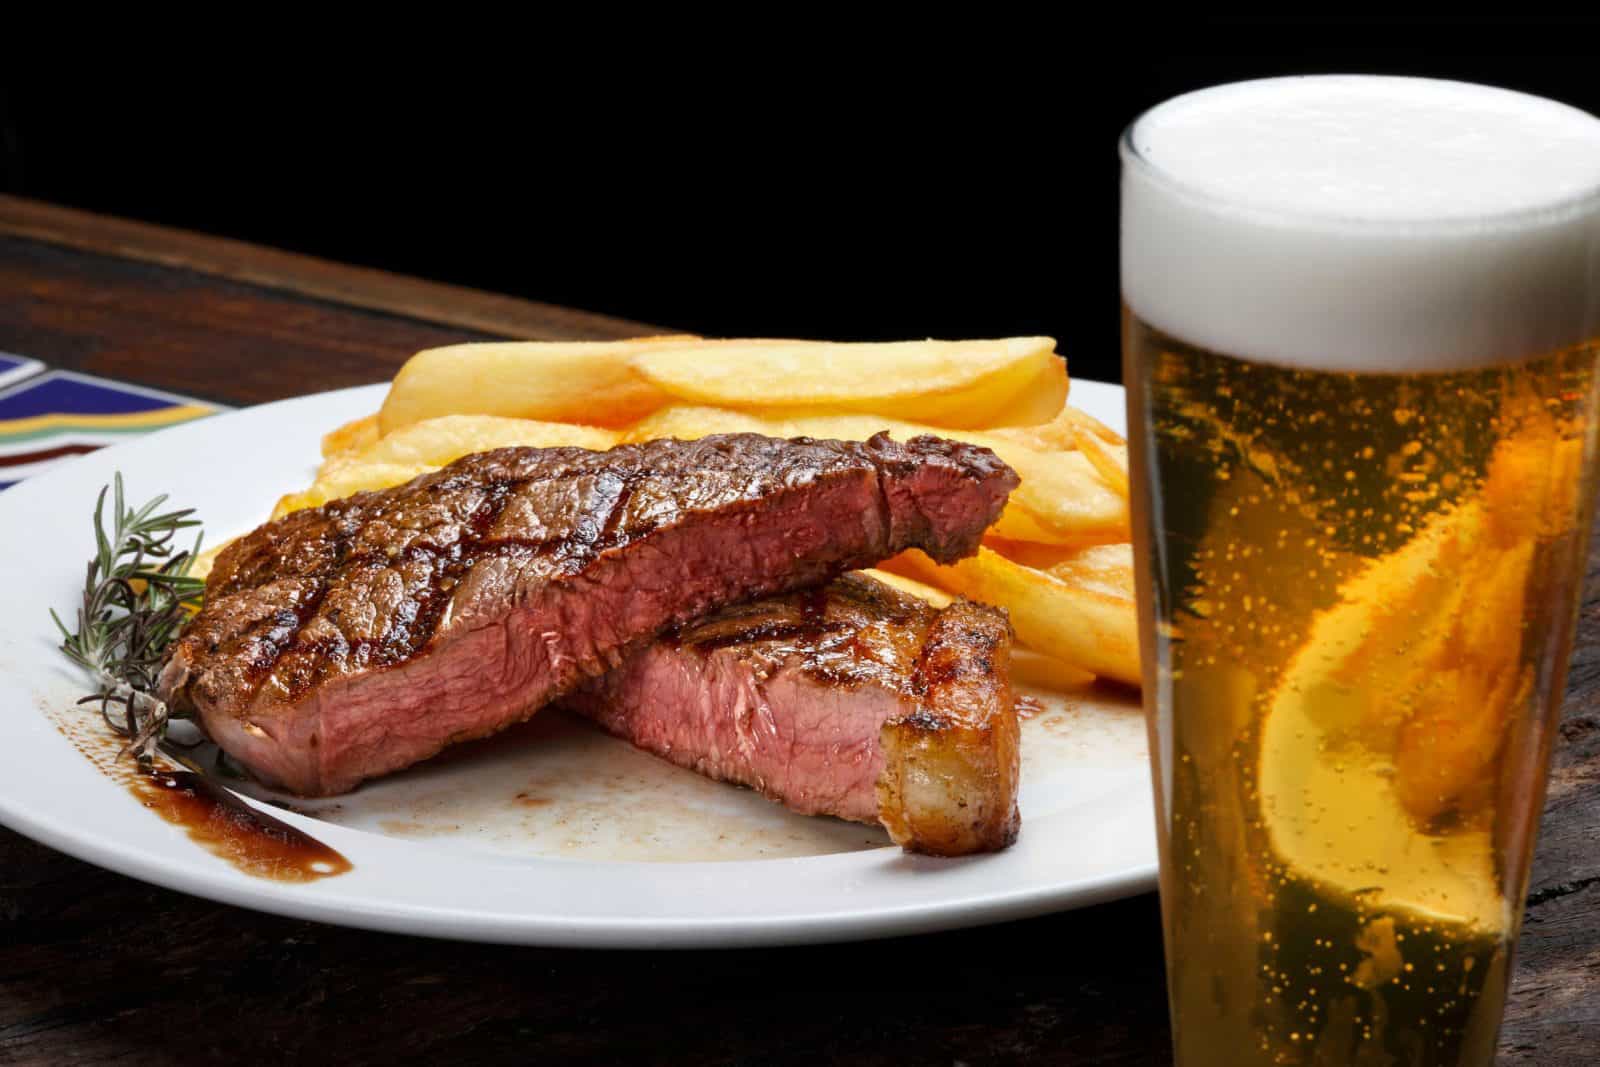 Steak with fries and beer